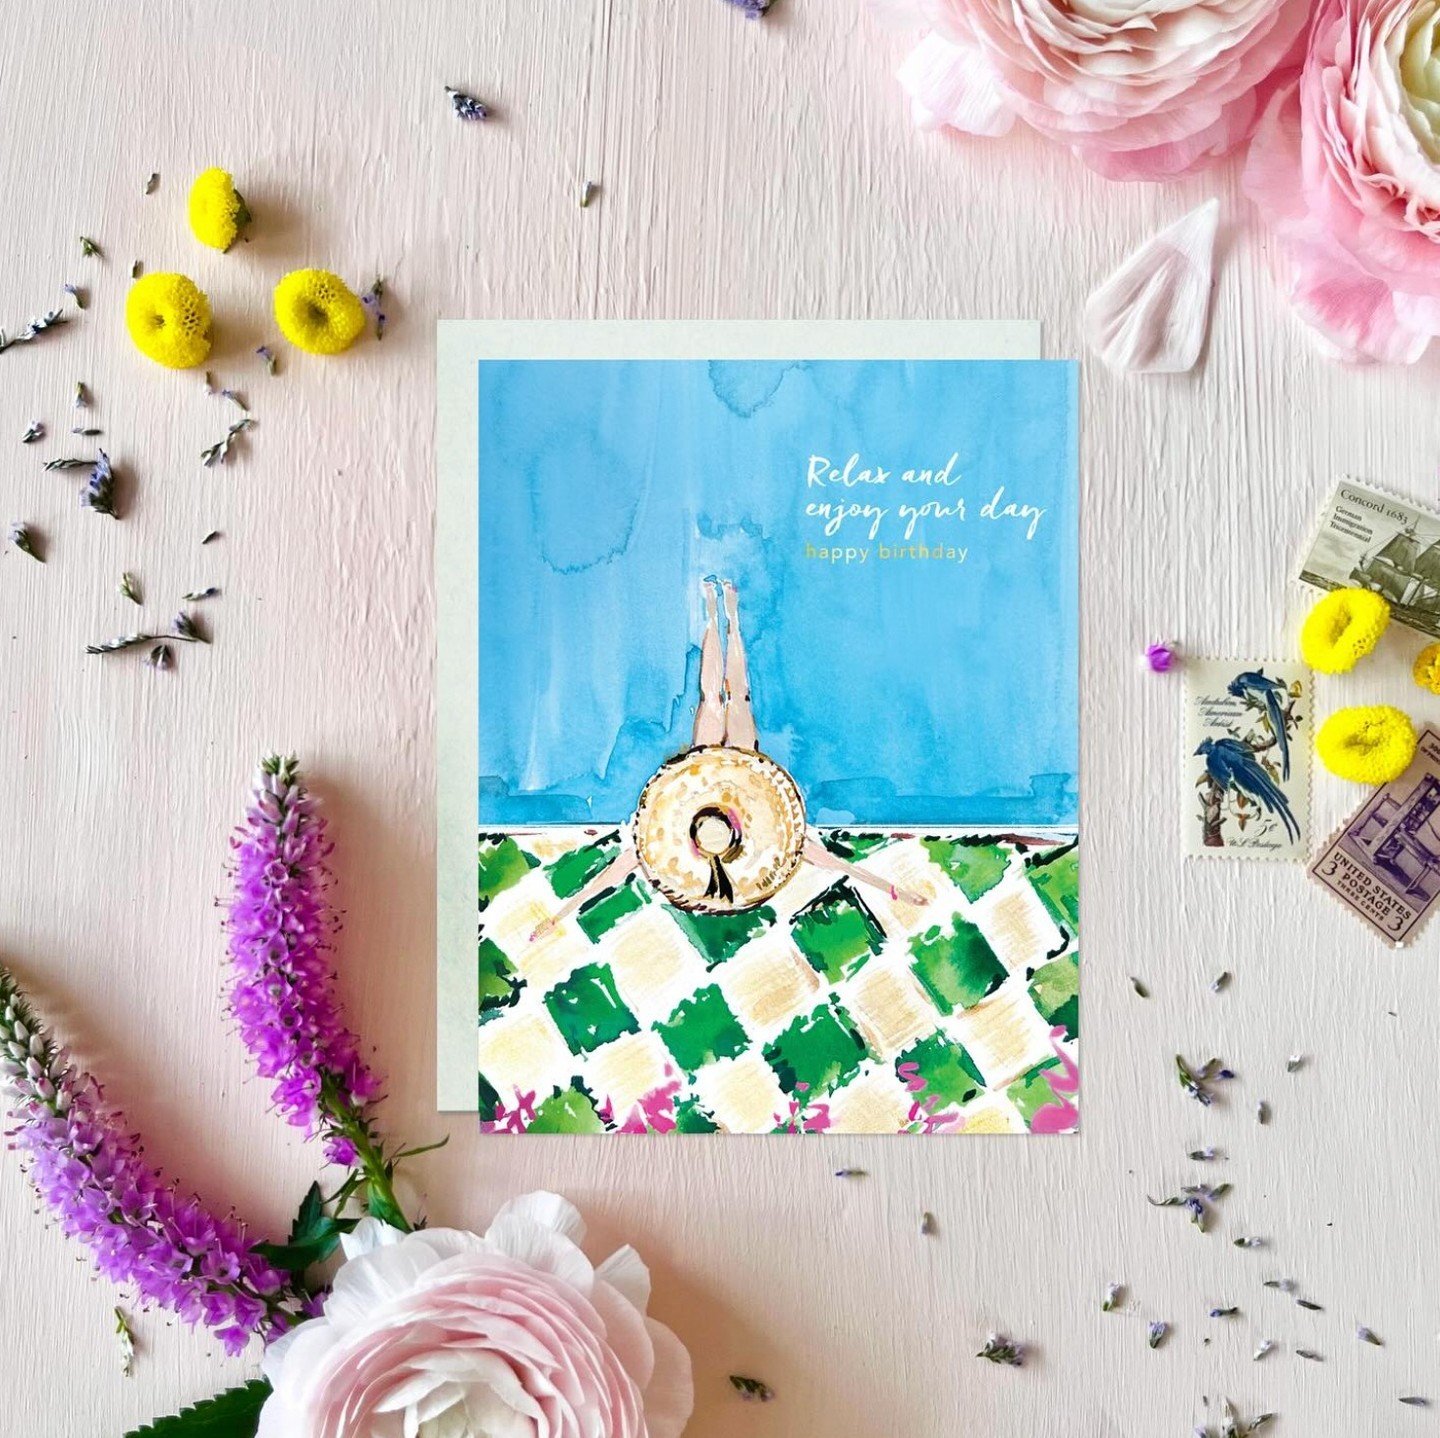 Who else is ready for Summer vibes? 👒 Fresh cards are waiting in The Paper E. Clips Collection from @darling_lemon ⁠
⁠
Don't forget you can enjoy Free Shipping when you sign up to our mailing list, until the end of May! ⁠
⁠
#papereclips #summer #sum